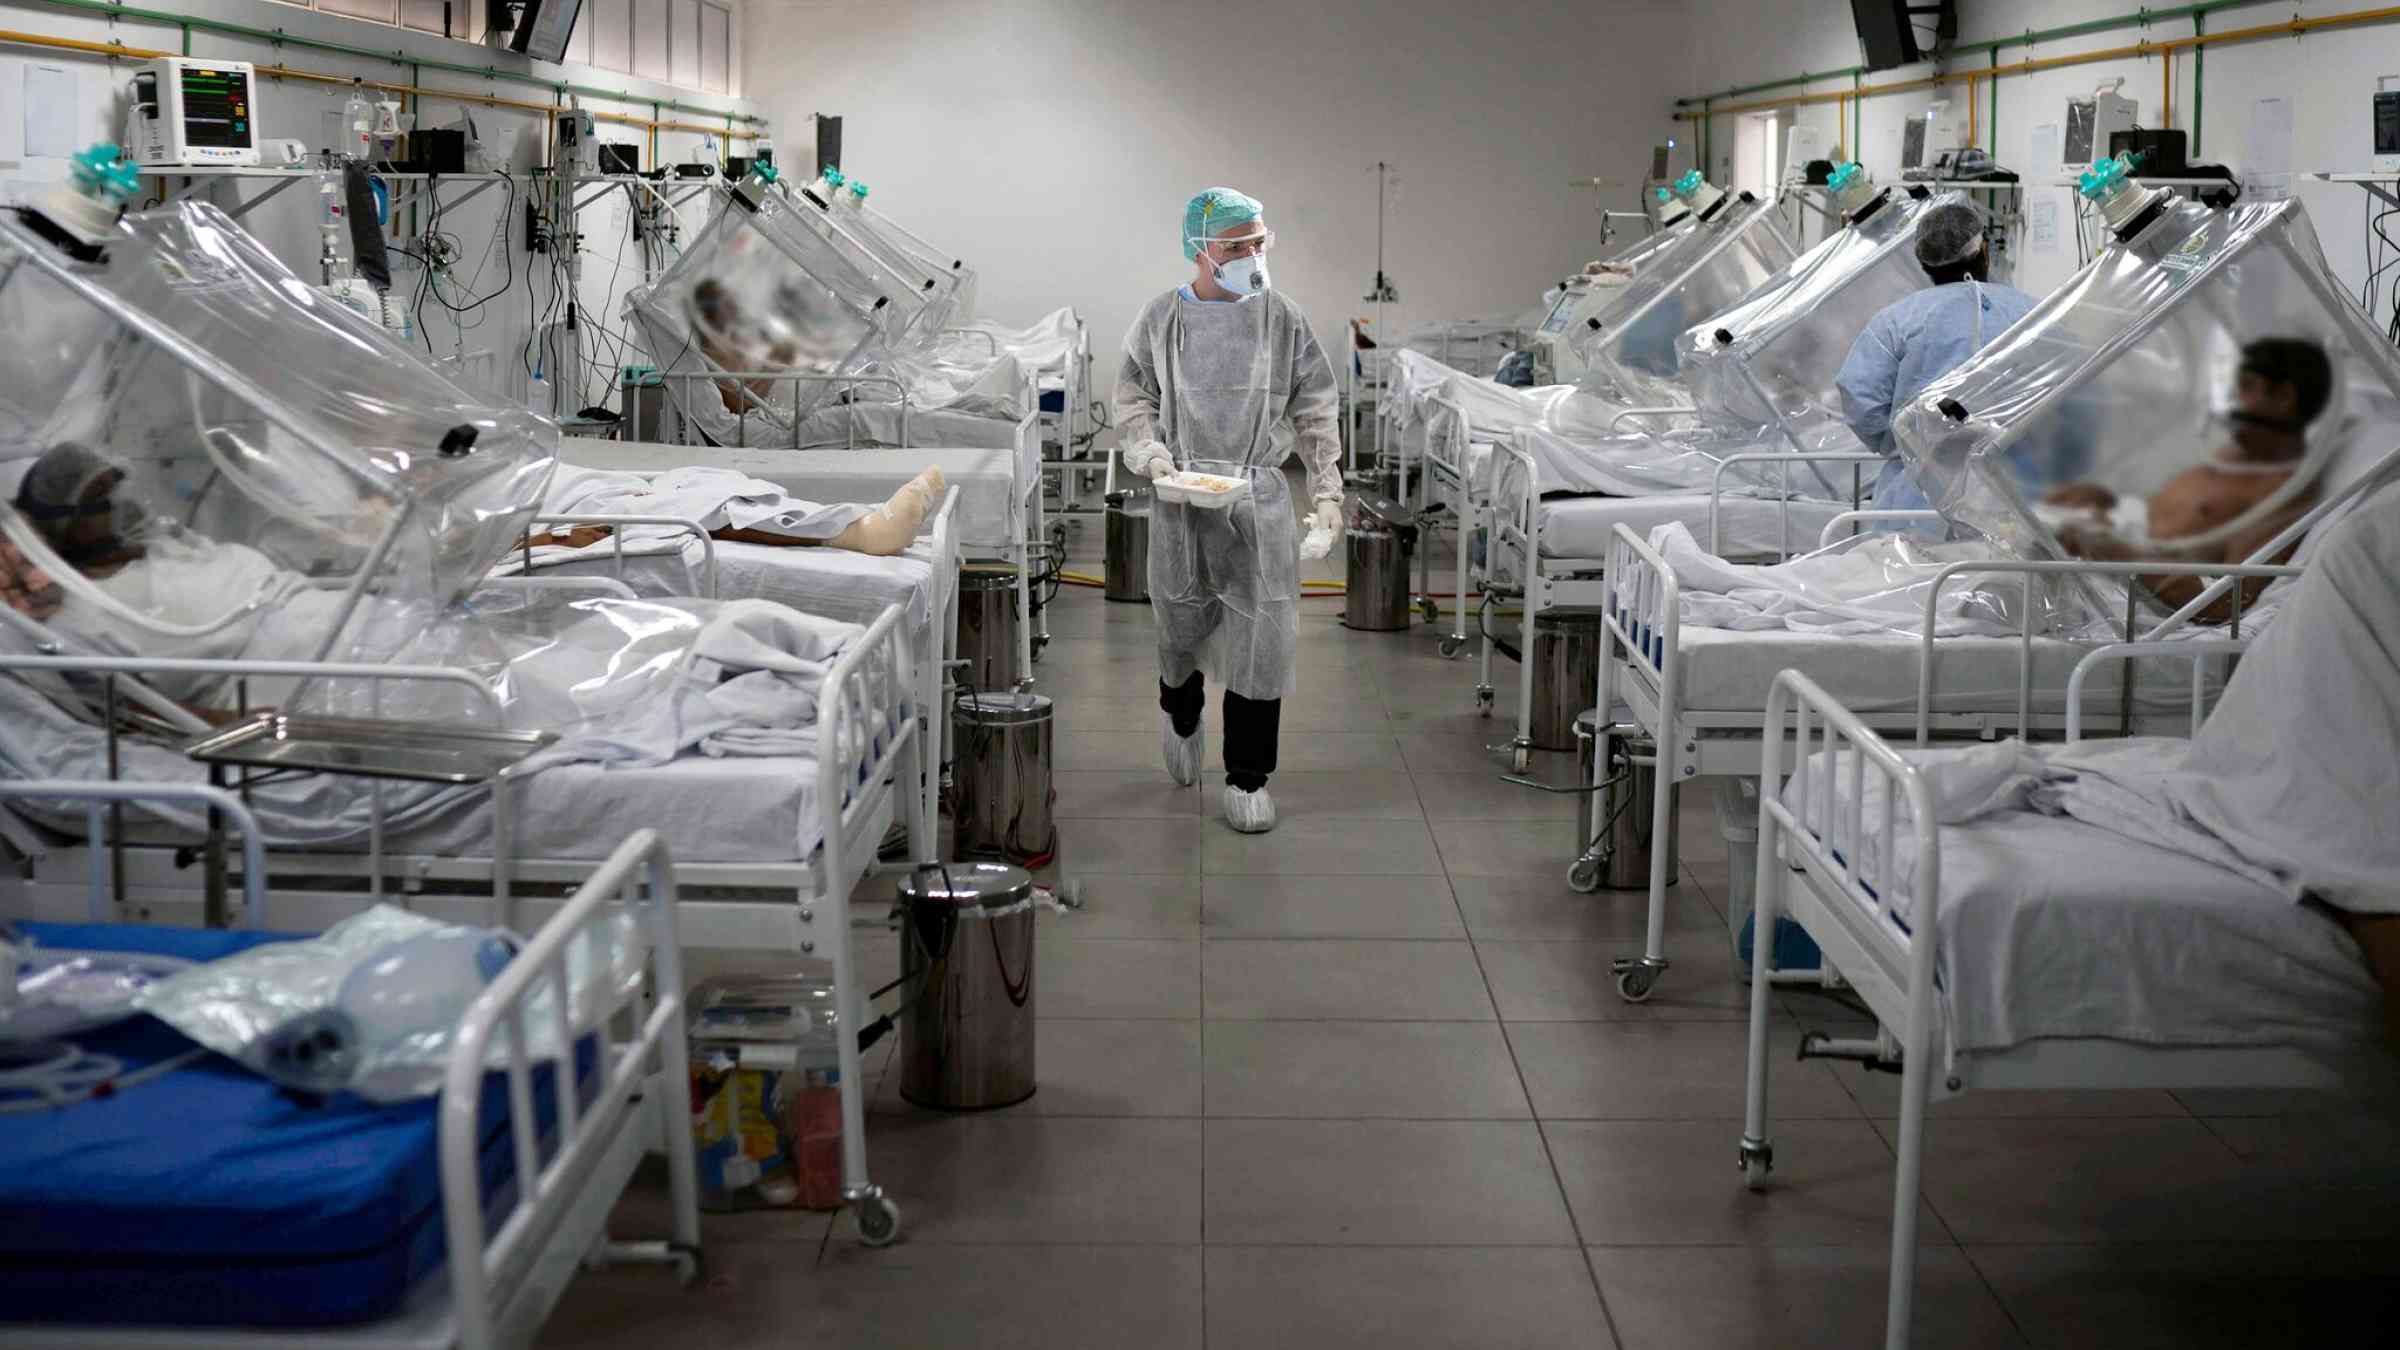 Medical staff work in the Intensive Care Unit (ICU) for COVID-19 multiple patients inside a special hospital in Bergamo, Italy